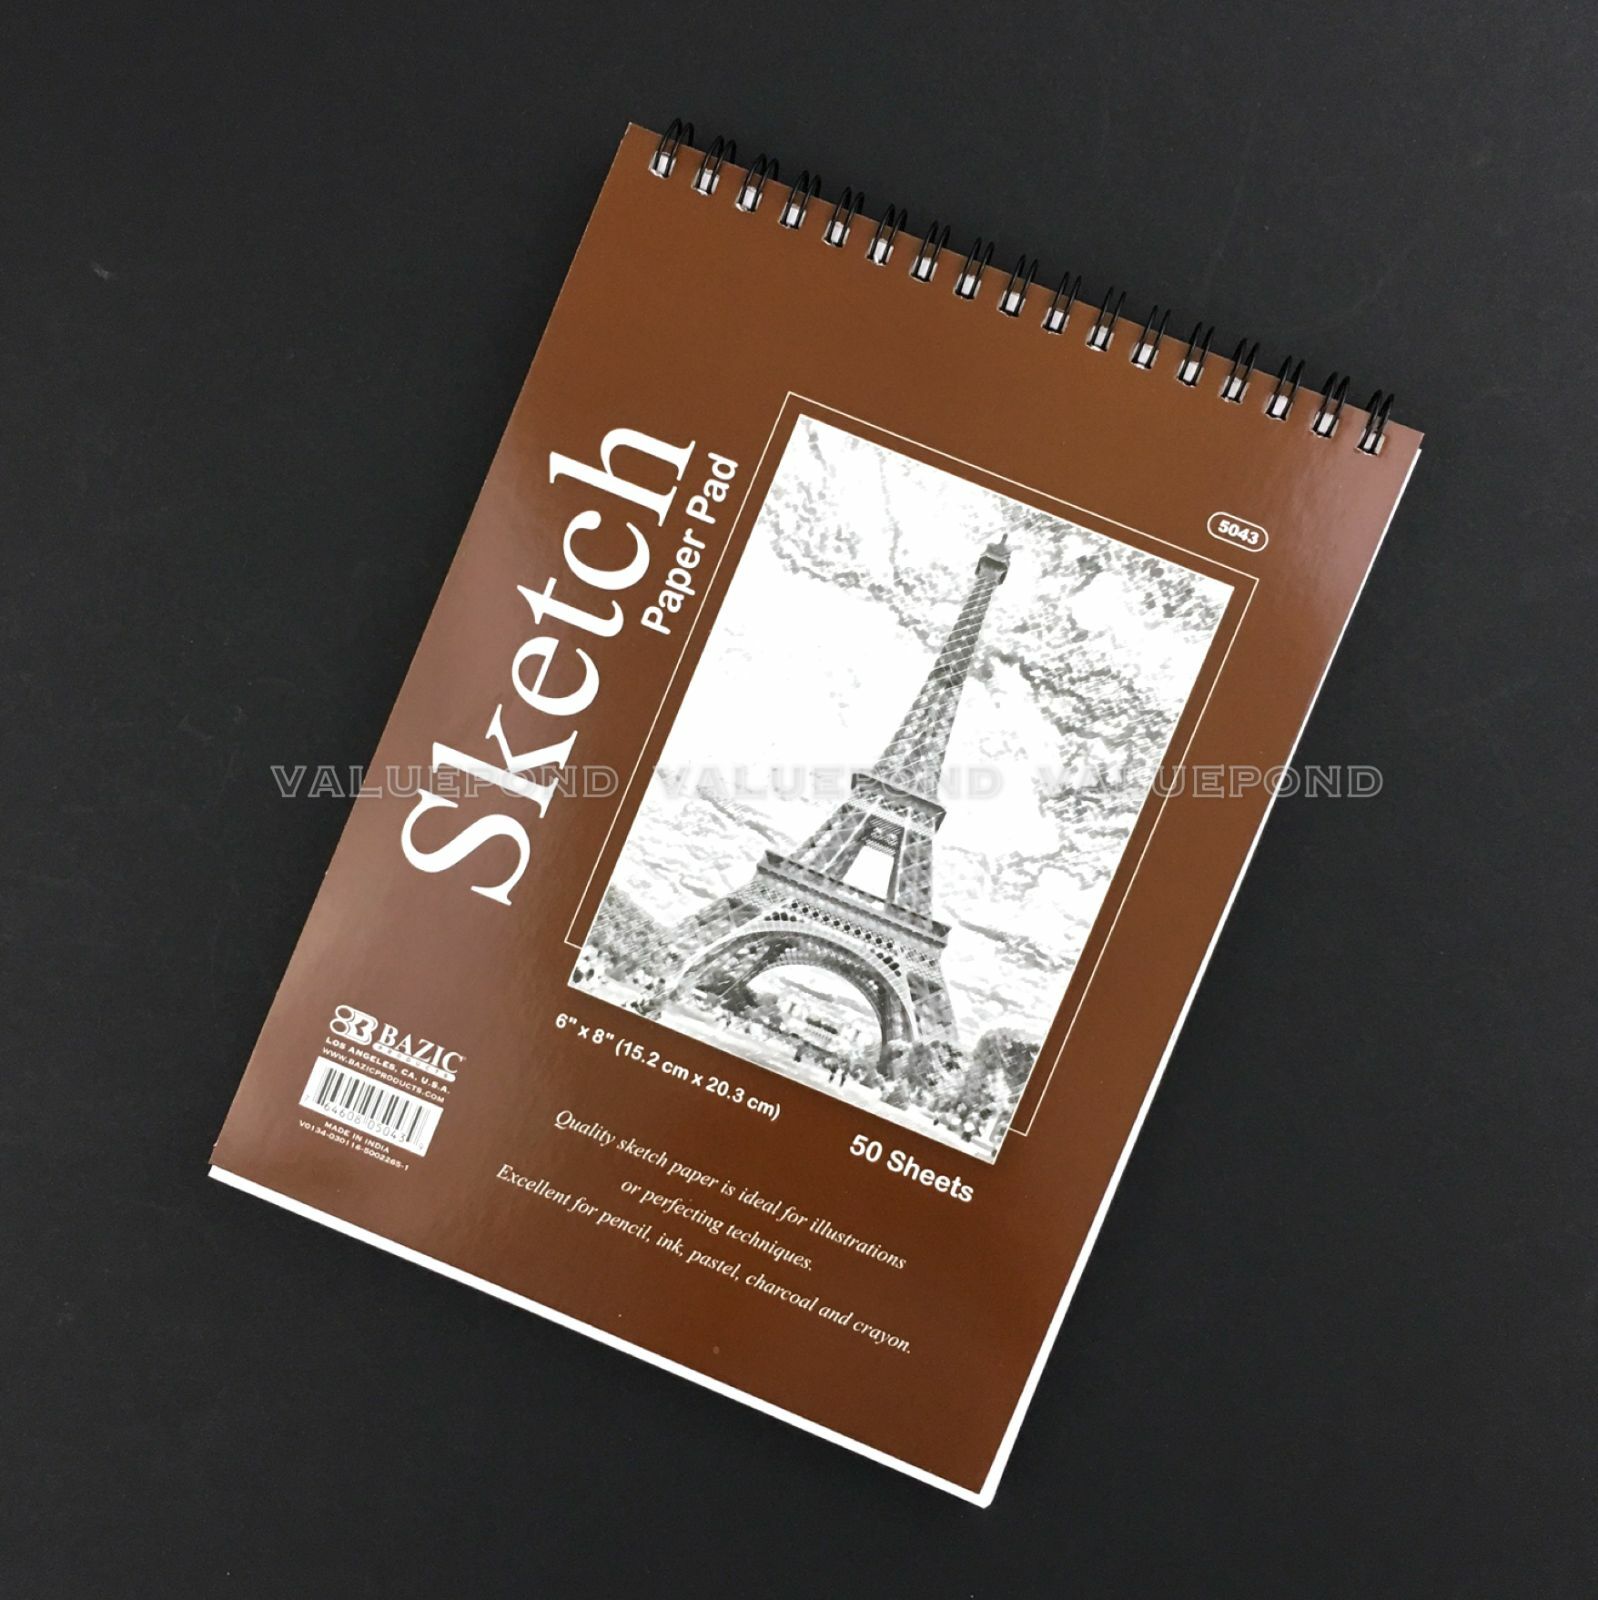 6" X 8" Premium Sketch Book Paper Pad 50 Sheets Quality Top Spiral Bound (f02)